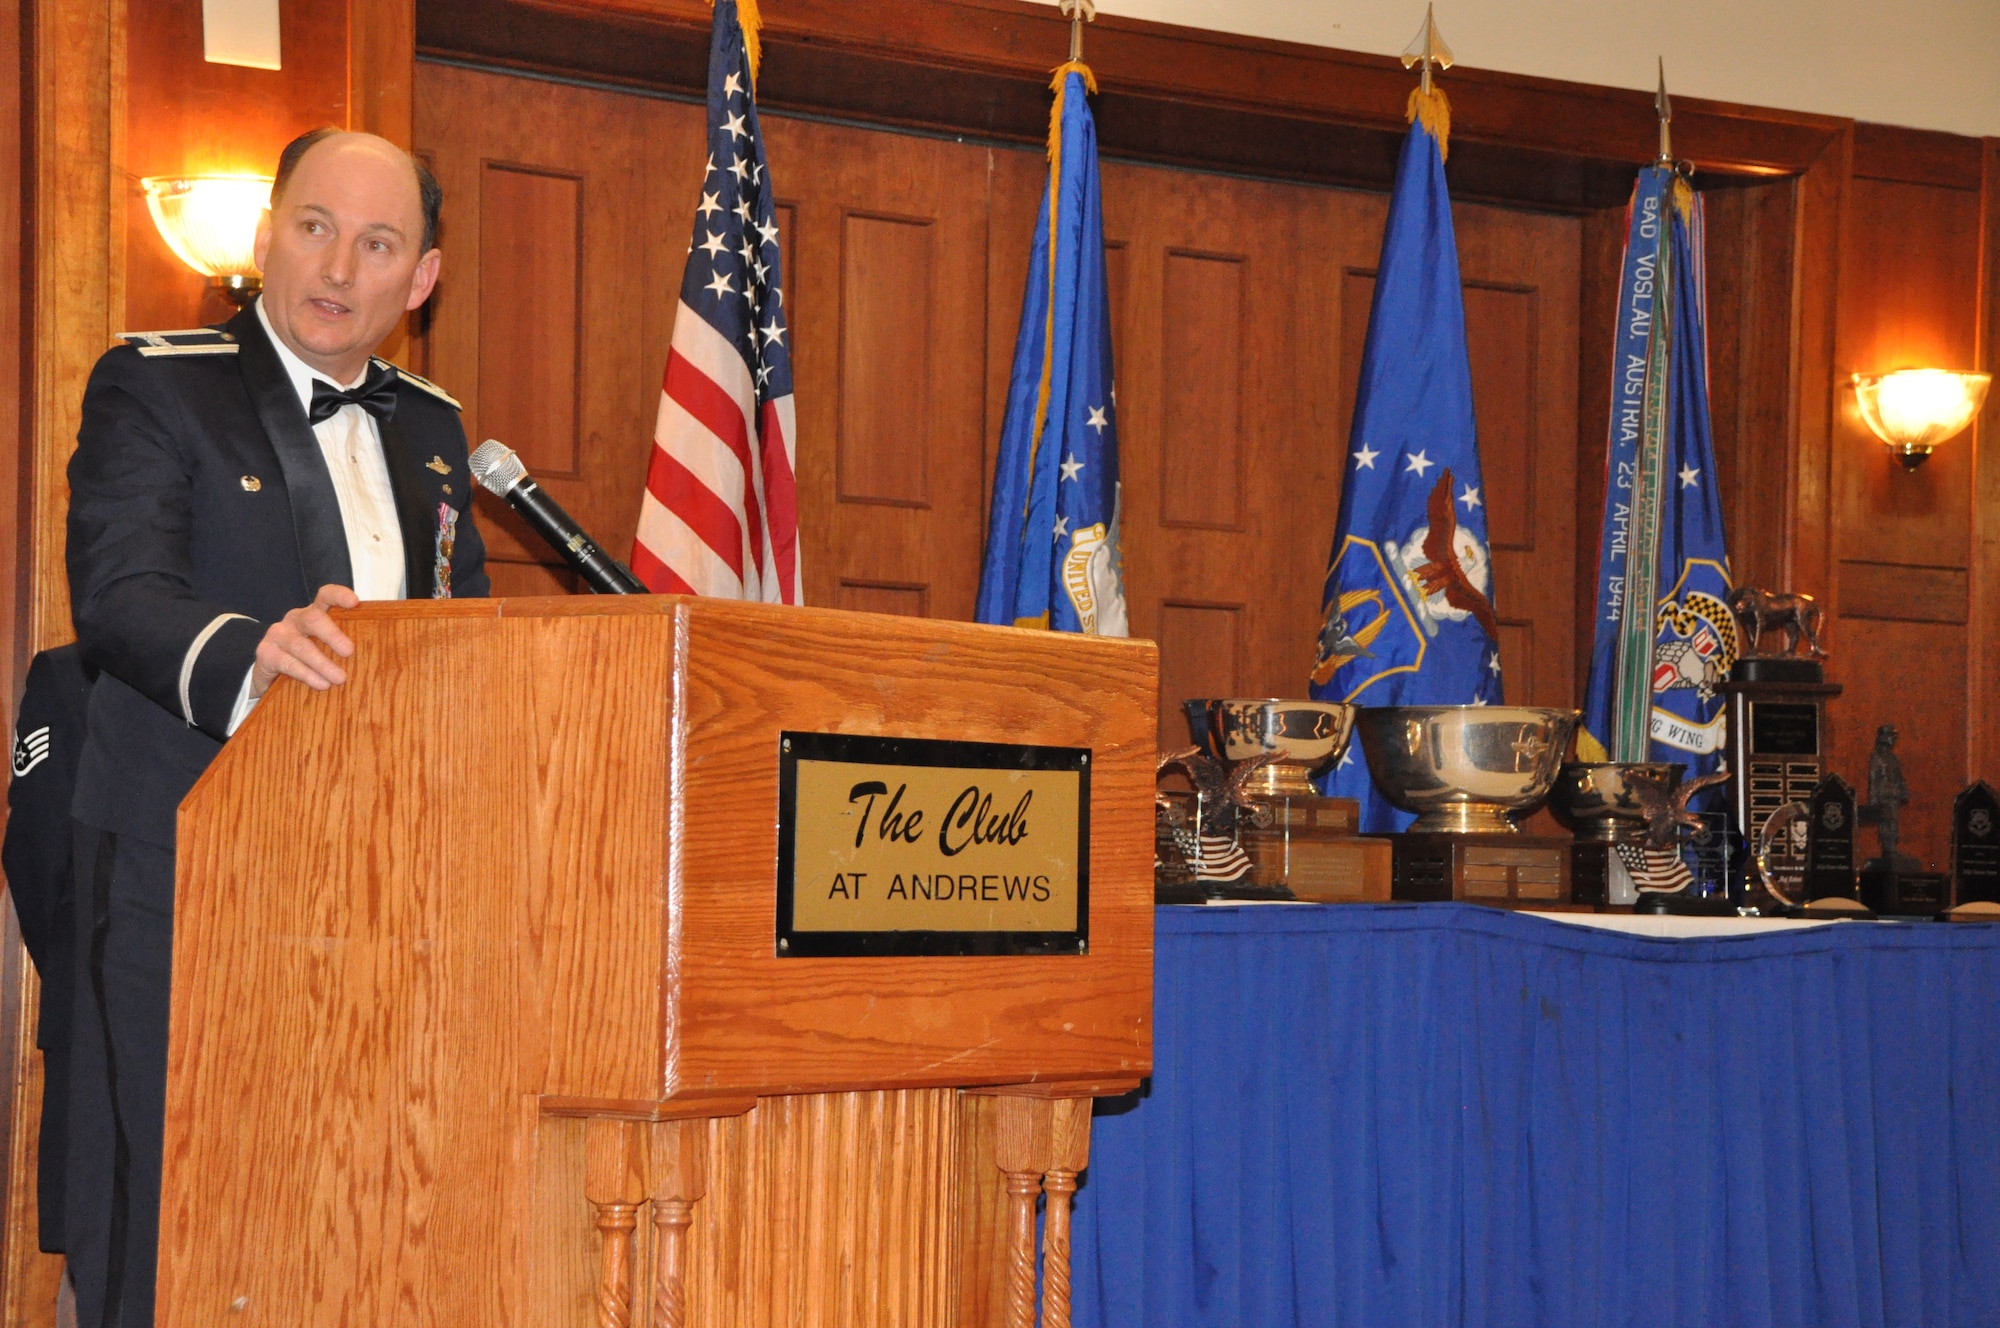 The 459th Air Refueling Wing commander, Col. Thomas K. Smith kicks off the festivities at the 459 ARW Annual Awards Banquet on Saturday, March 7, 2015. (Air Force Photo / SrA Kristin Kurtz)